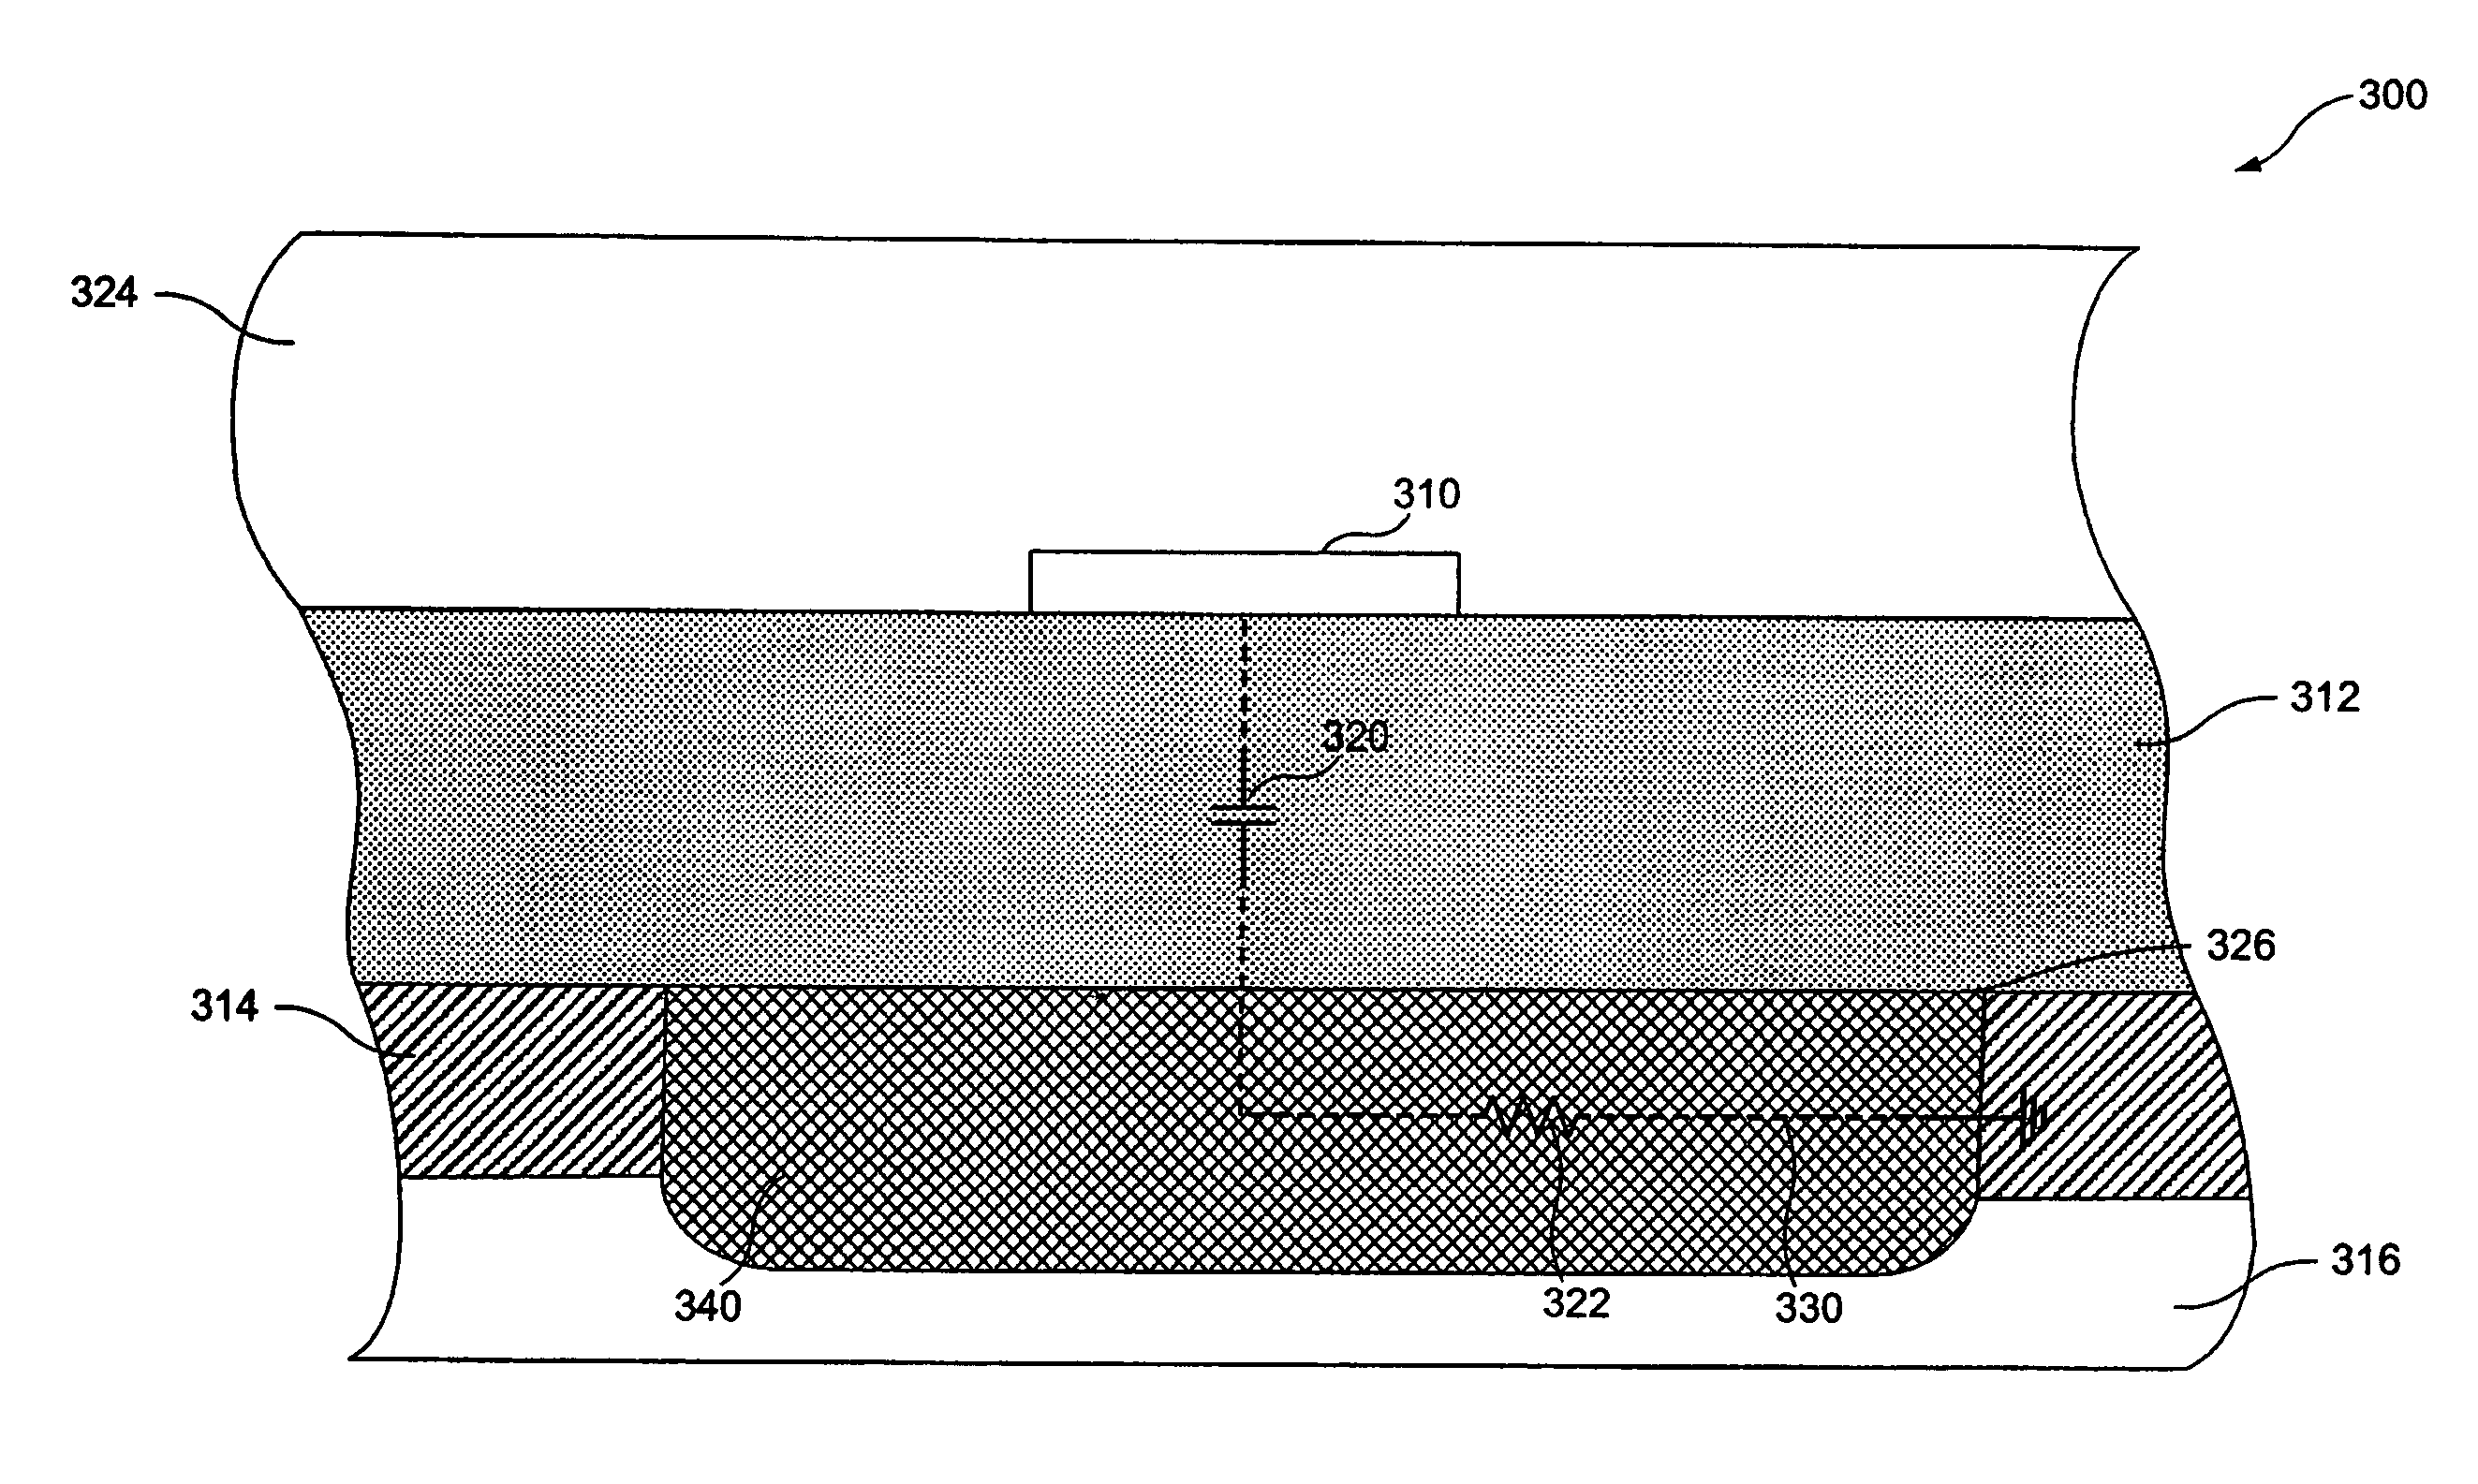 Apparatus for reducing parasitic capacitance in a semiconductor device